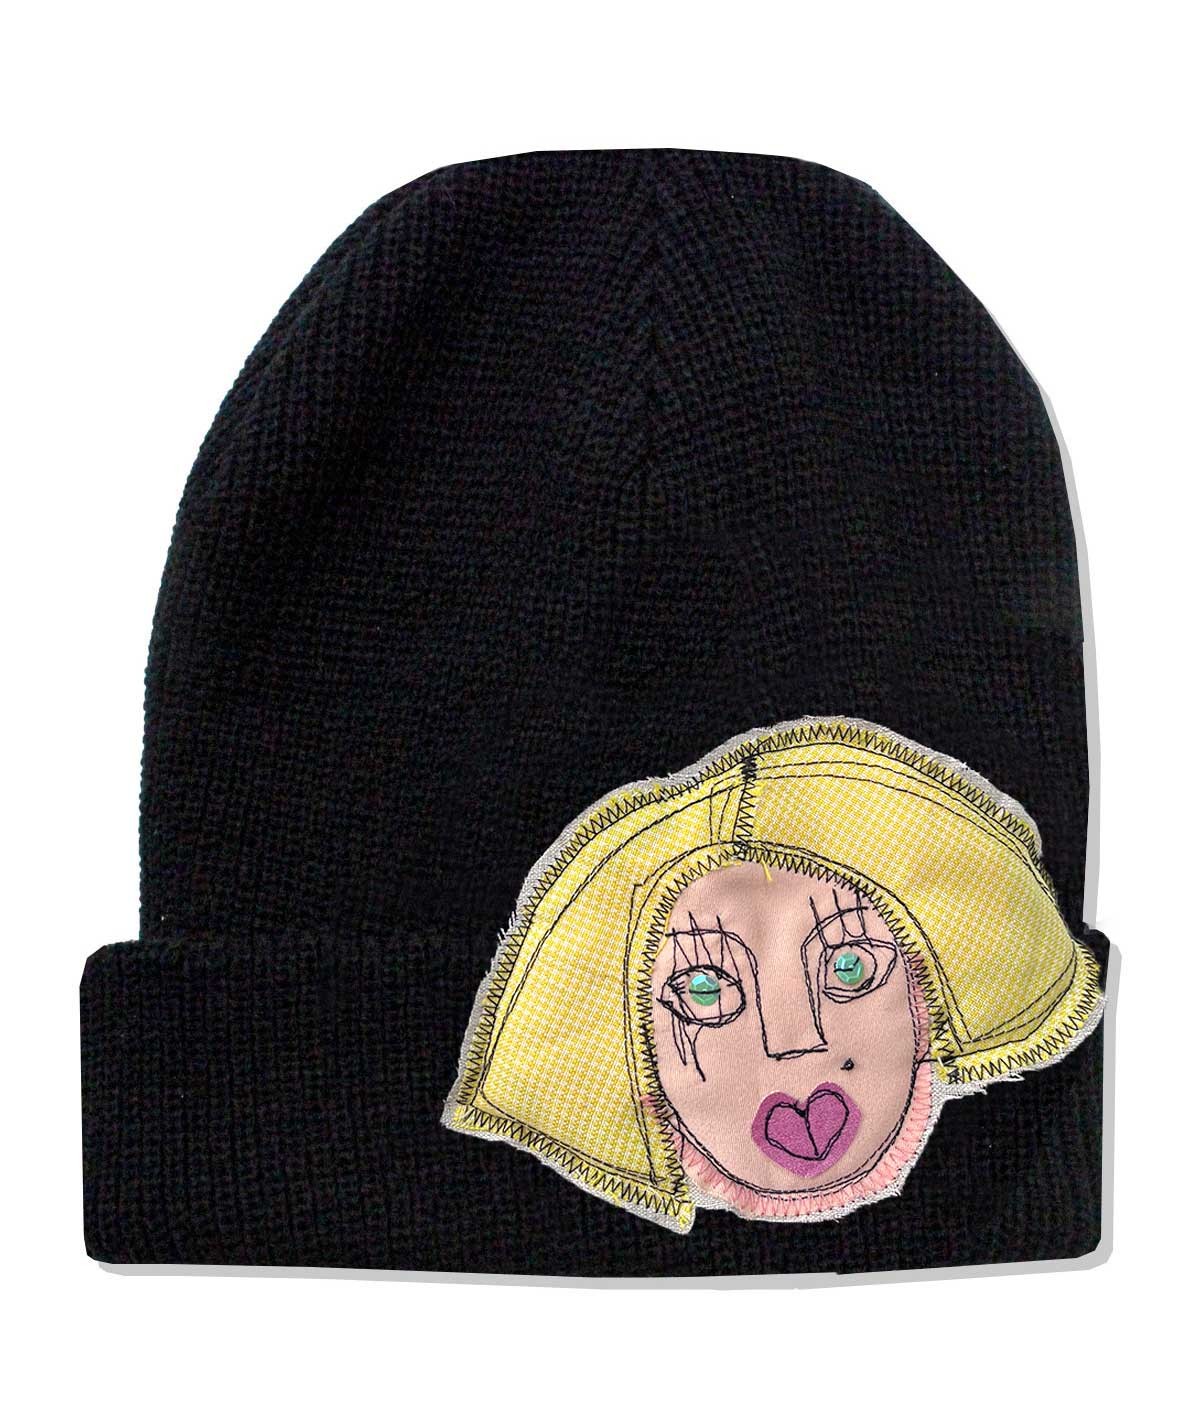 The blonde - hat